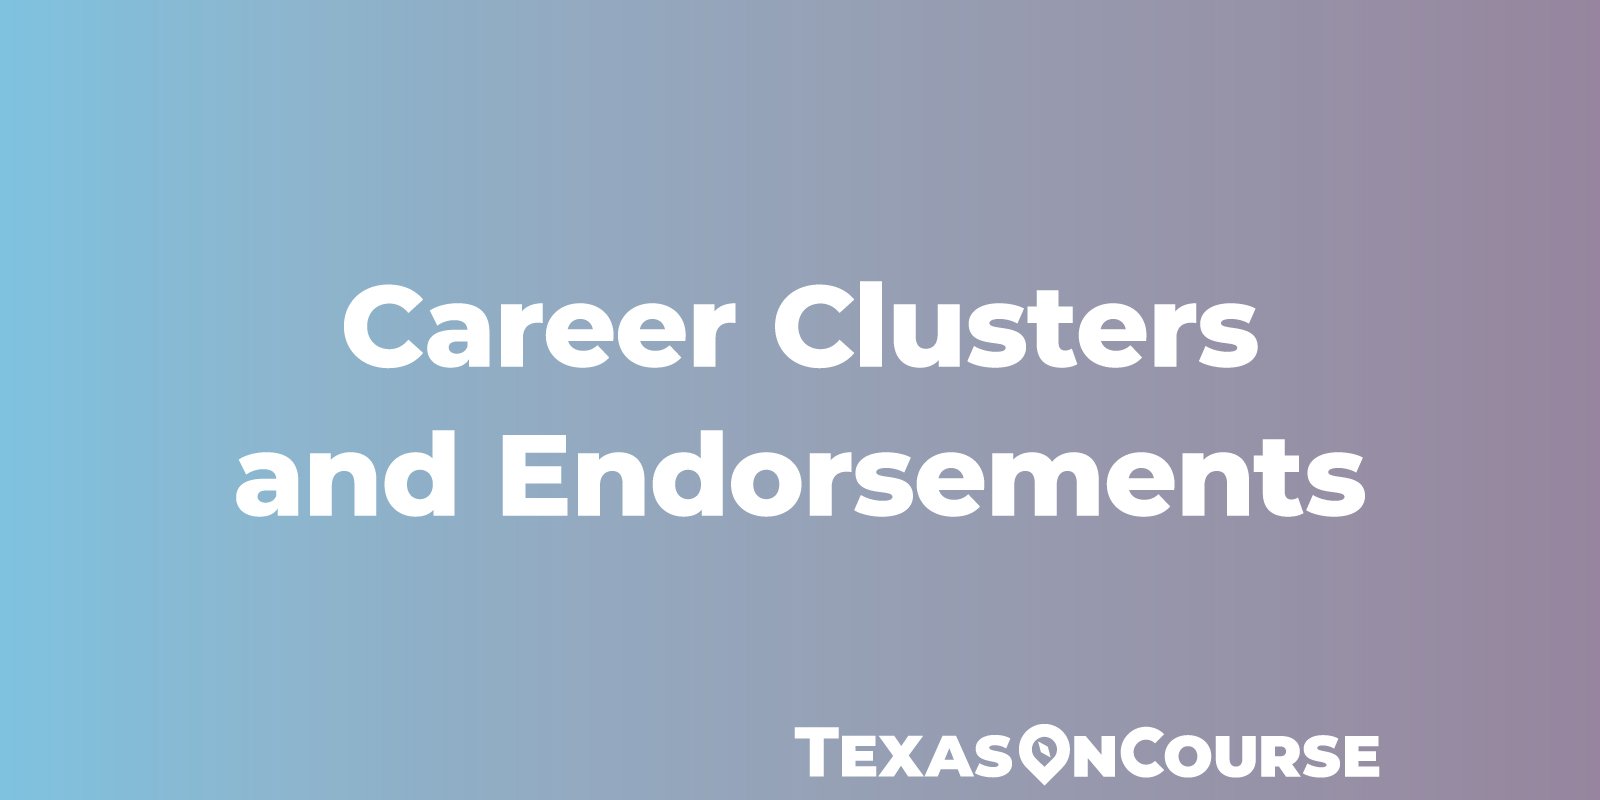 Career Clusters and Endorsements